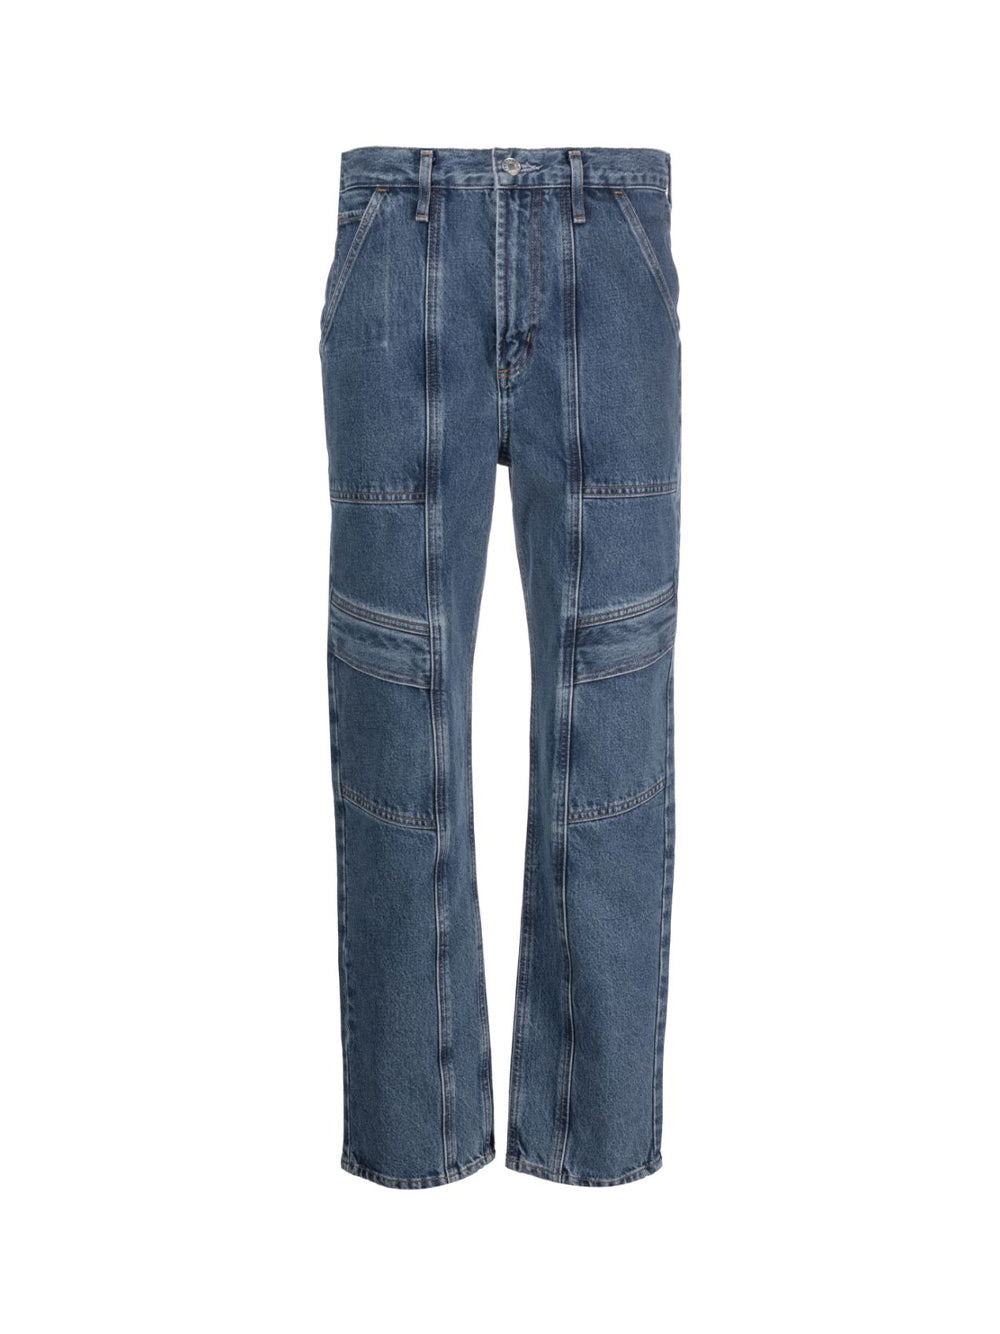 Cooper Jeans Trousers